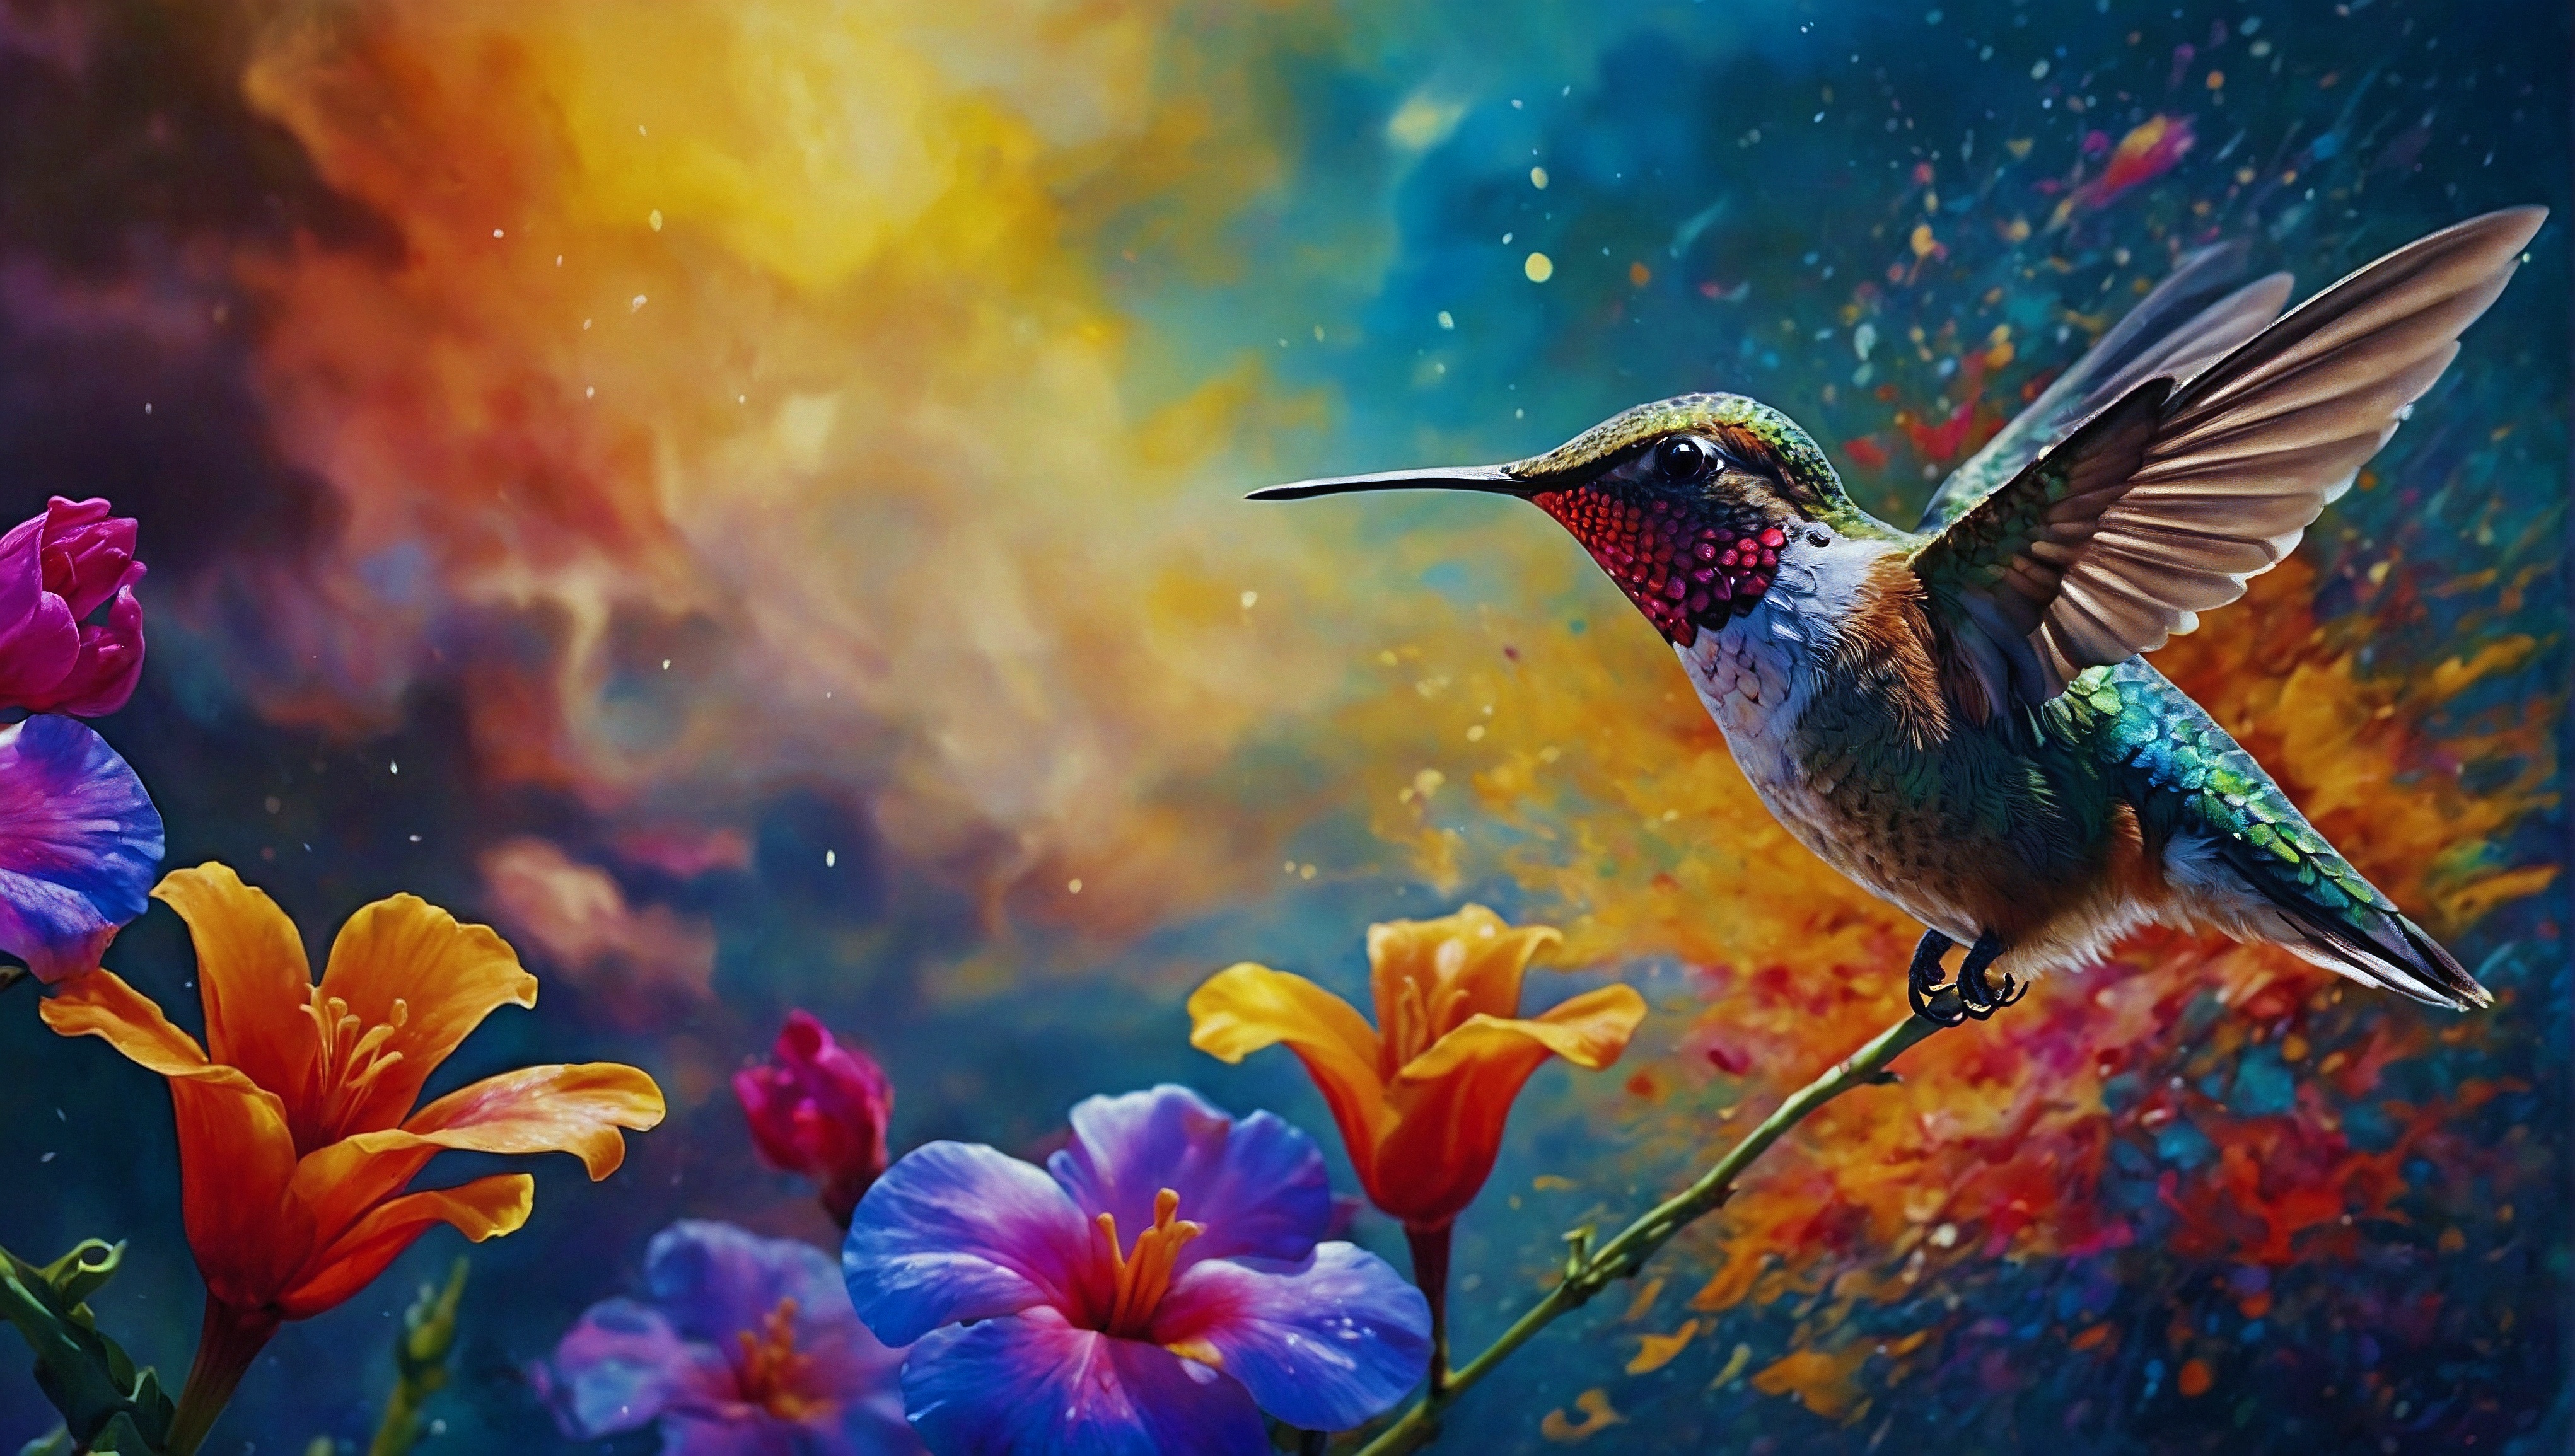 Painting of hummingbirds on colorful flower stems